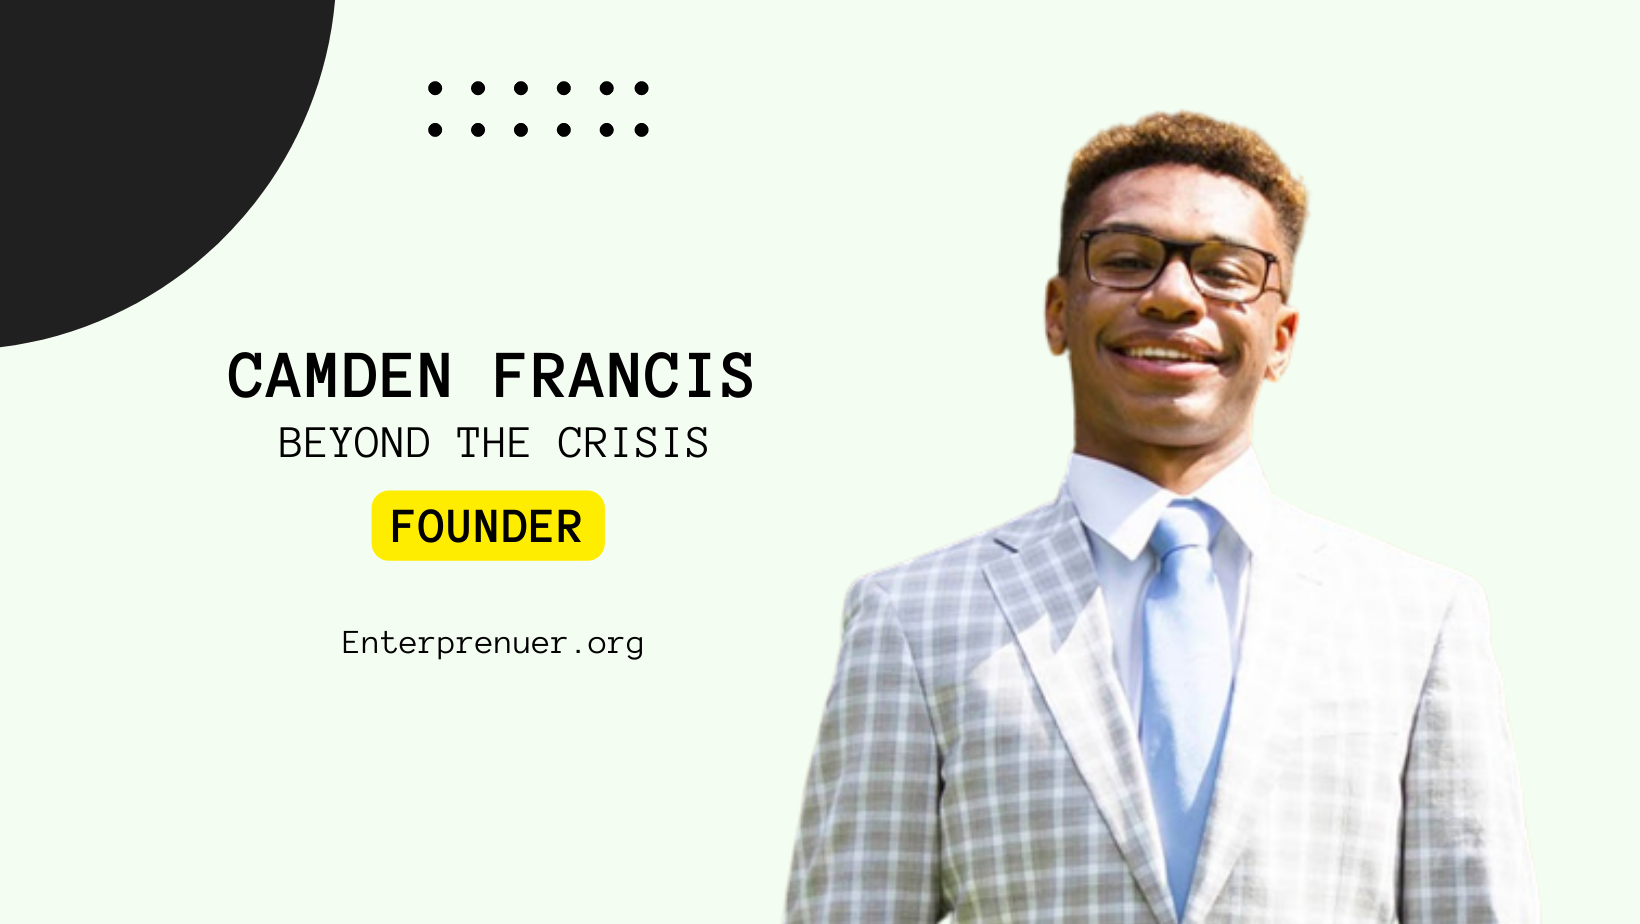 Camden Francis Founder of Beyond the Crisis